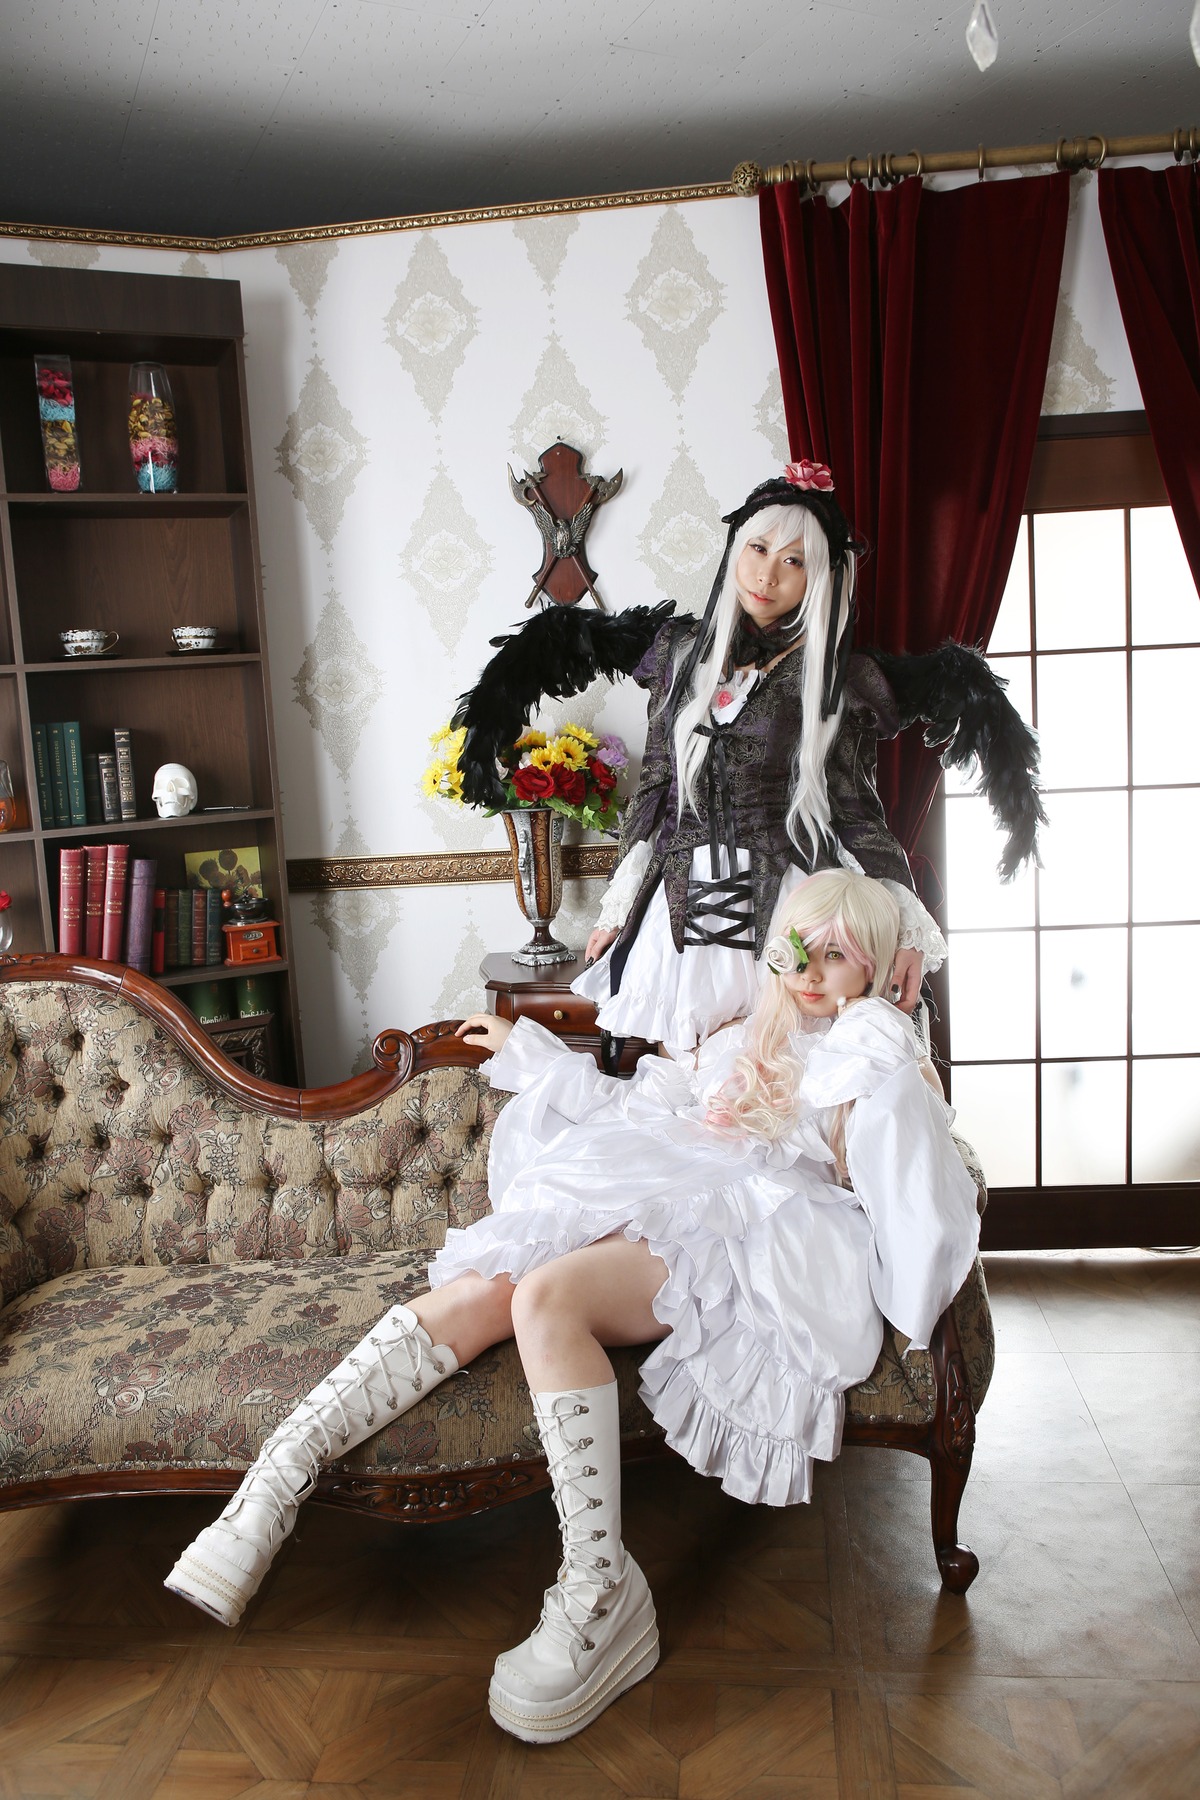 2girls bandages boots dress feathers gloves gun hat indoors long_hair multiple_cosplay multiple_girls sitting tagme white_dress white_hair window